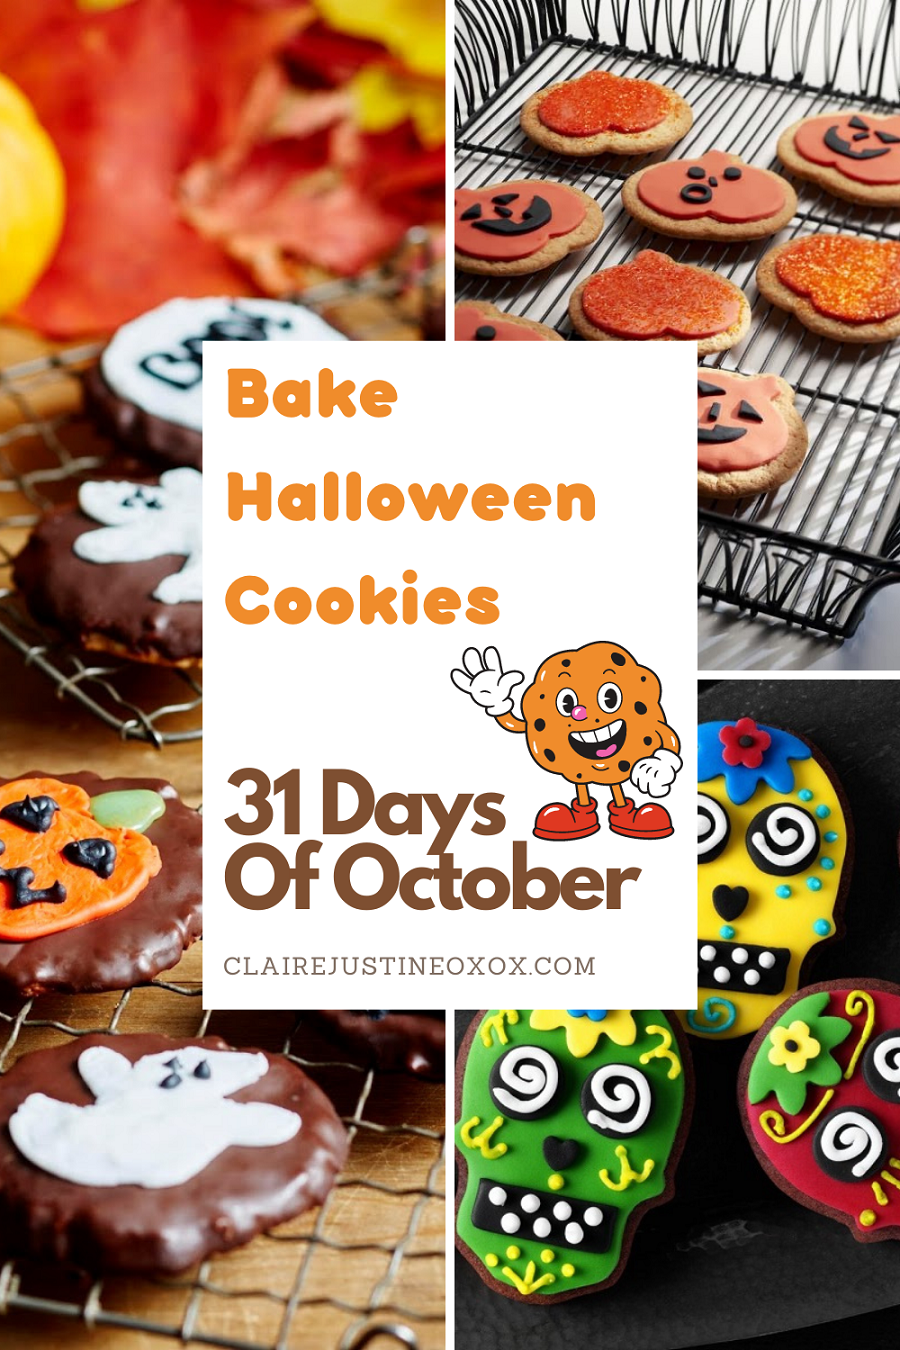 Bake Halloween Cookies: 3 Recipes To Try